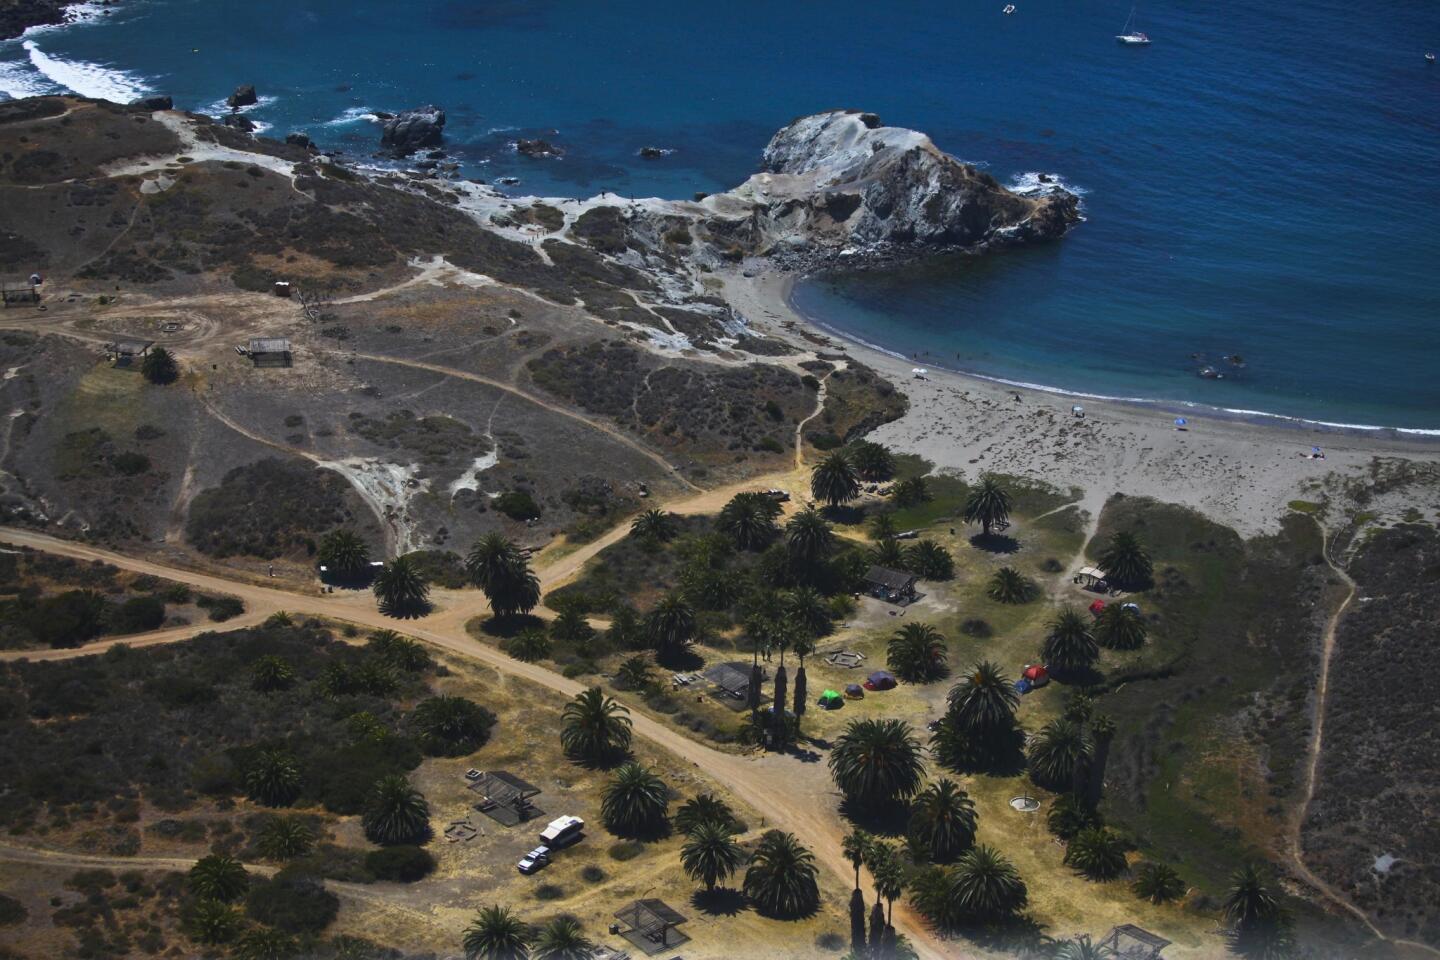 Avalon in Catalina is a well trodden part of the island, but most visitors don't know the bounty of natural and outdoor activities in the island's interior, including campgrounds on the beach, pine forests and abundant wildlife.